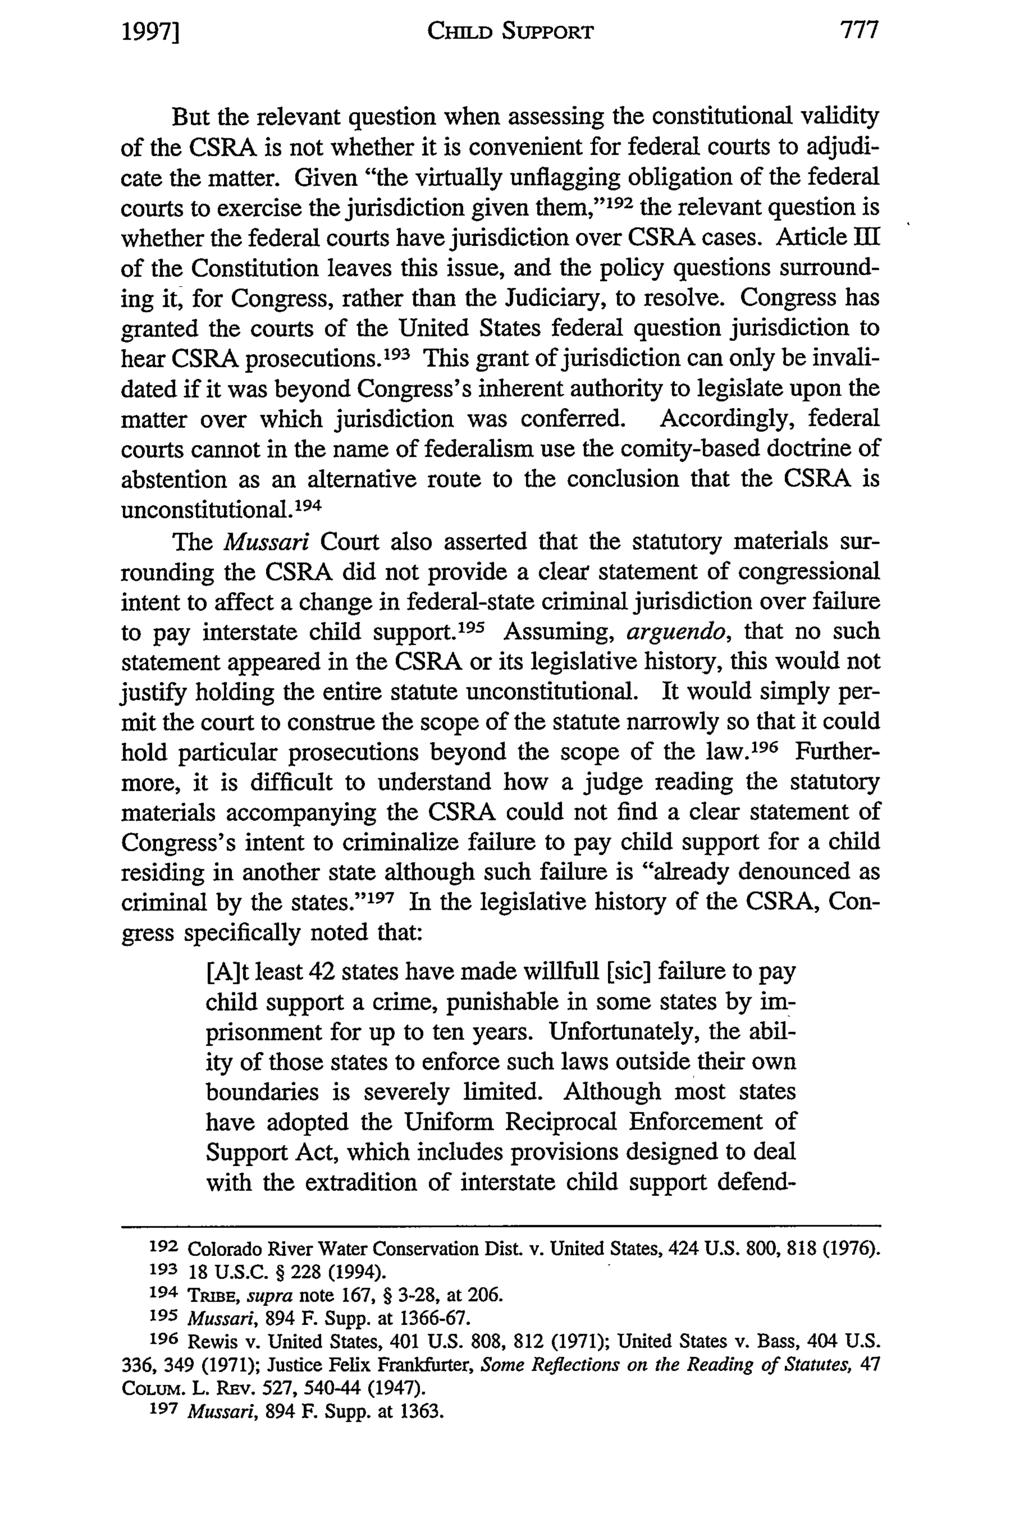 1997] CHILD SUPPORT But the relevant question when assessing the constitutional validity of the CSRA is not whether it is convenient for federal courts to adjudicate the matter.